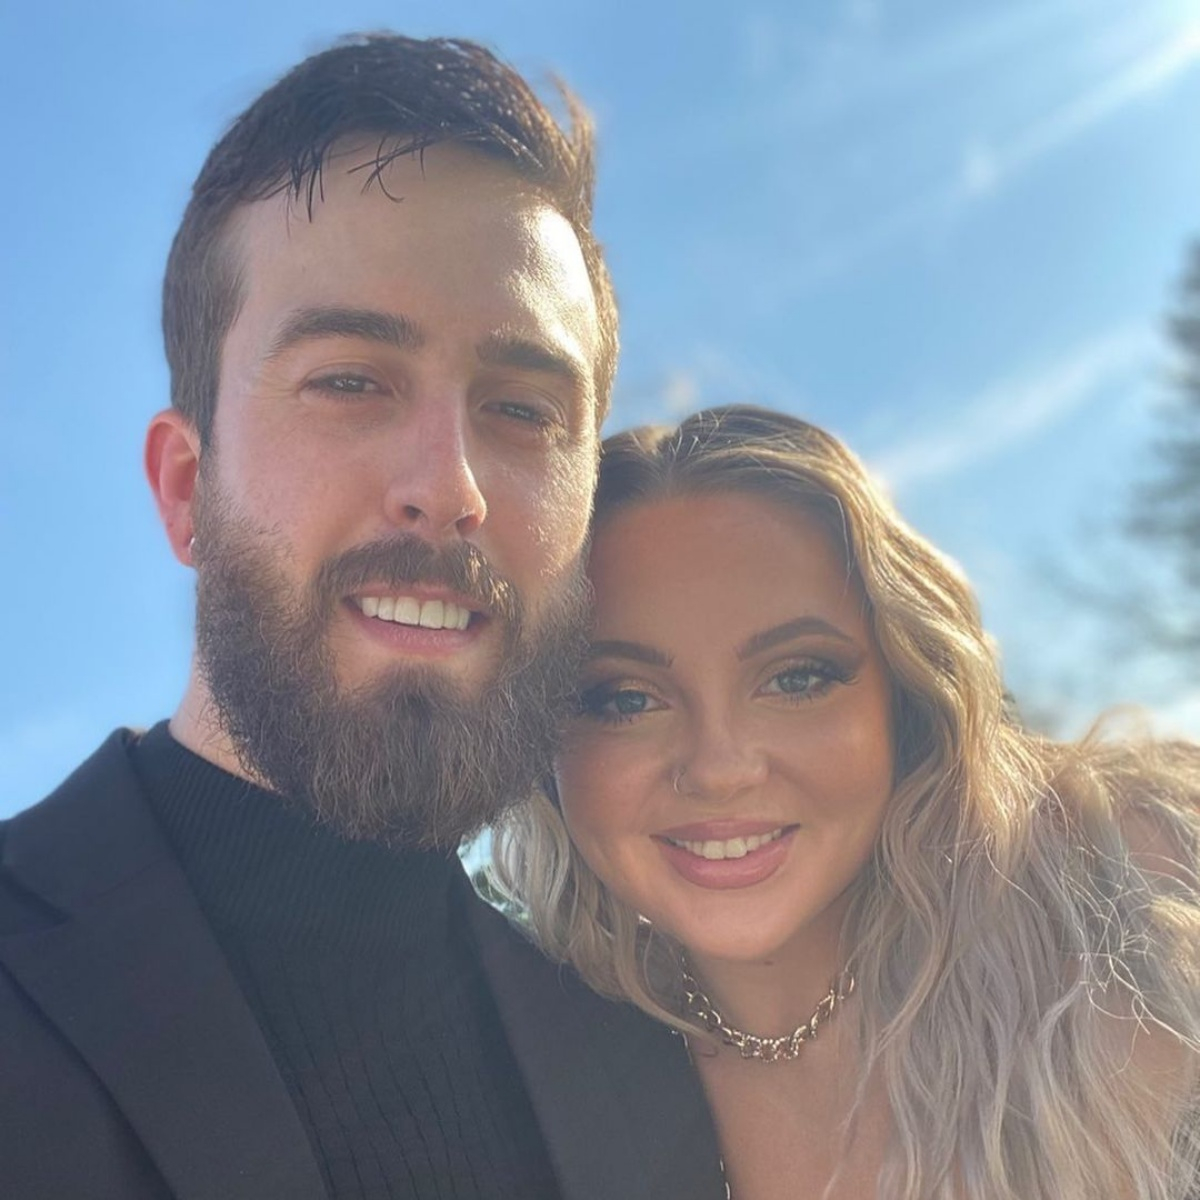 Teen Mom's Jade Cline Reveals Her and Husband Sean Austin’s Plan for Baby No. 2